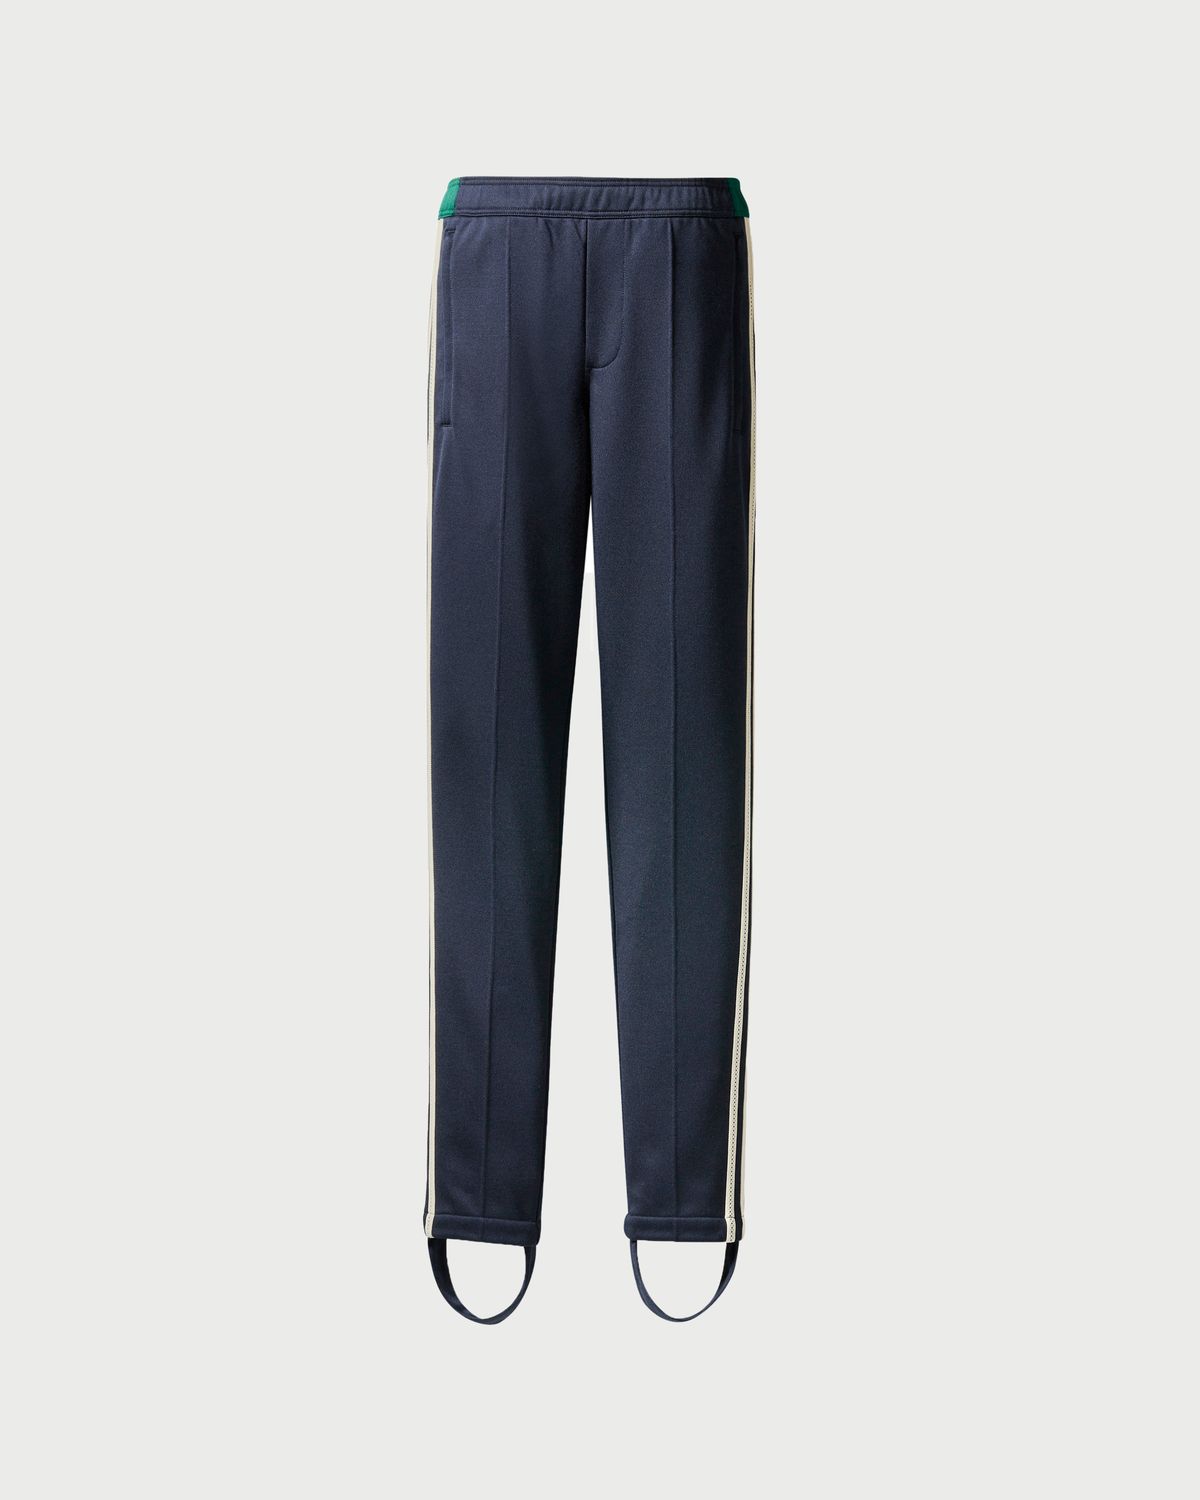 Adidas x Wales Bonner – Lovers Trousers Navy - Track Pants - Blue - Image 1